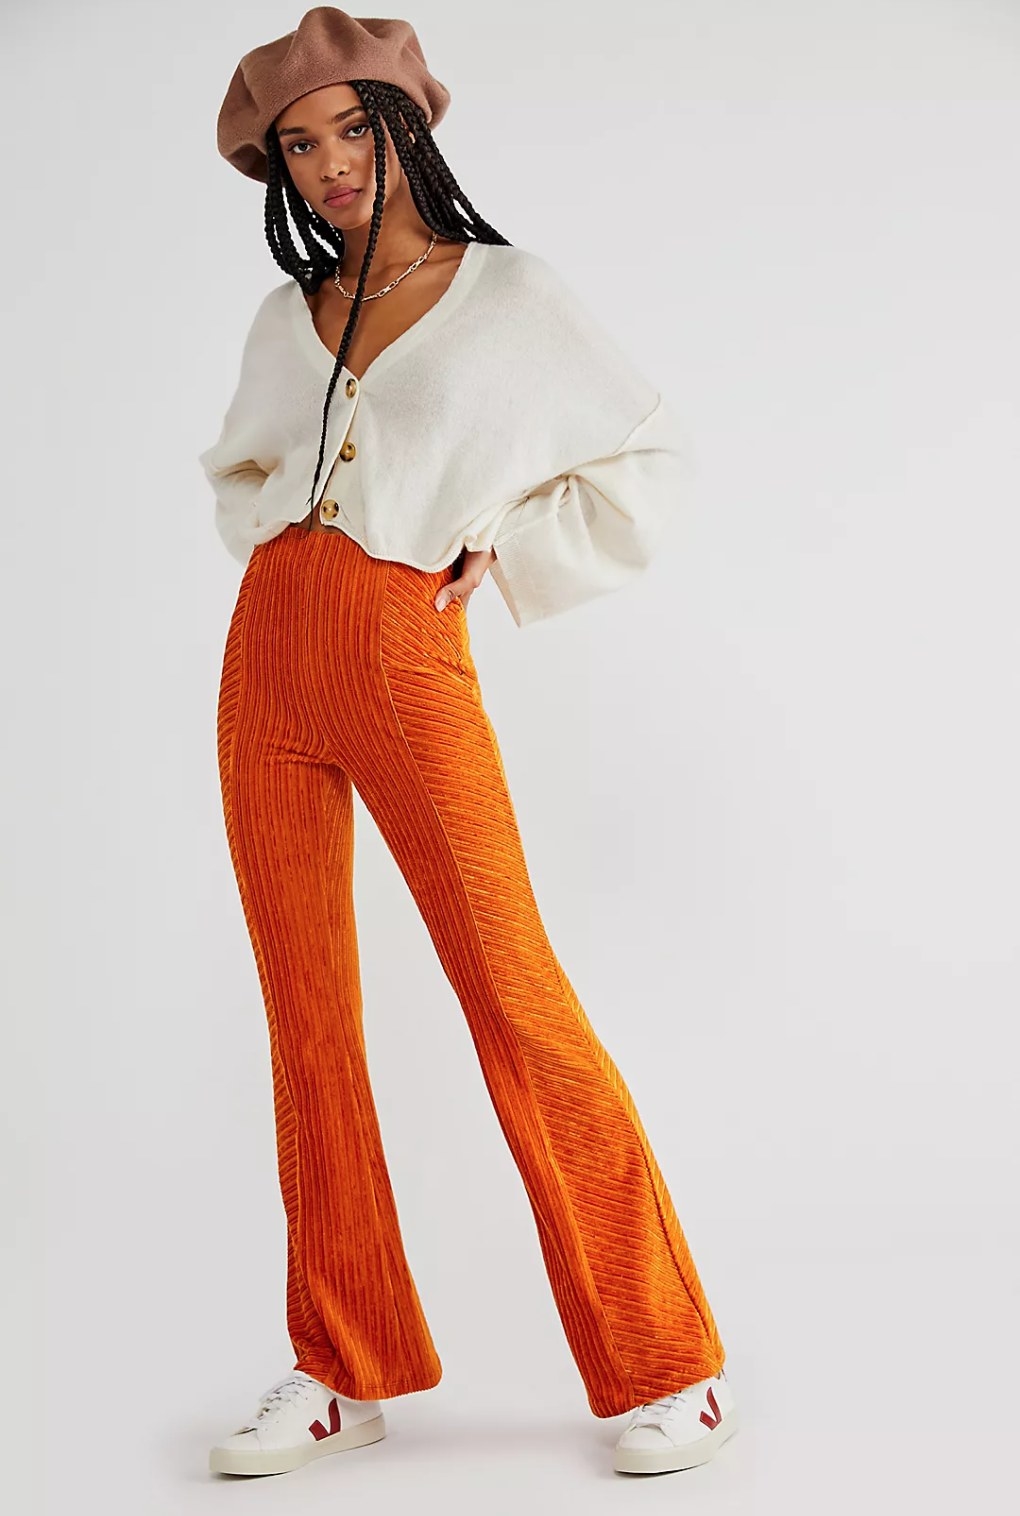 model wearing the velvet pants in bright orange with a cream cardigan, white sneakers, and a brown hat